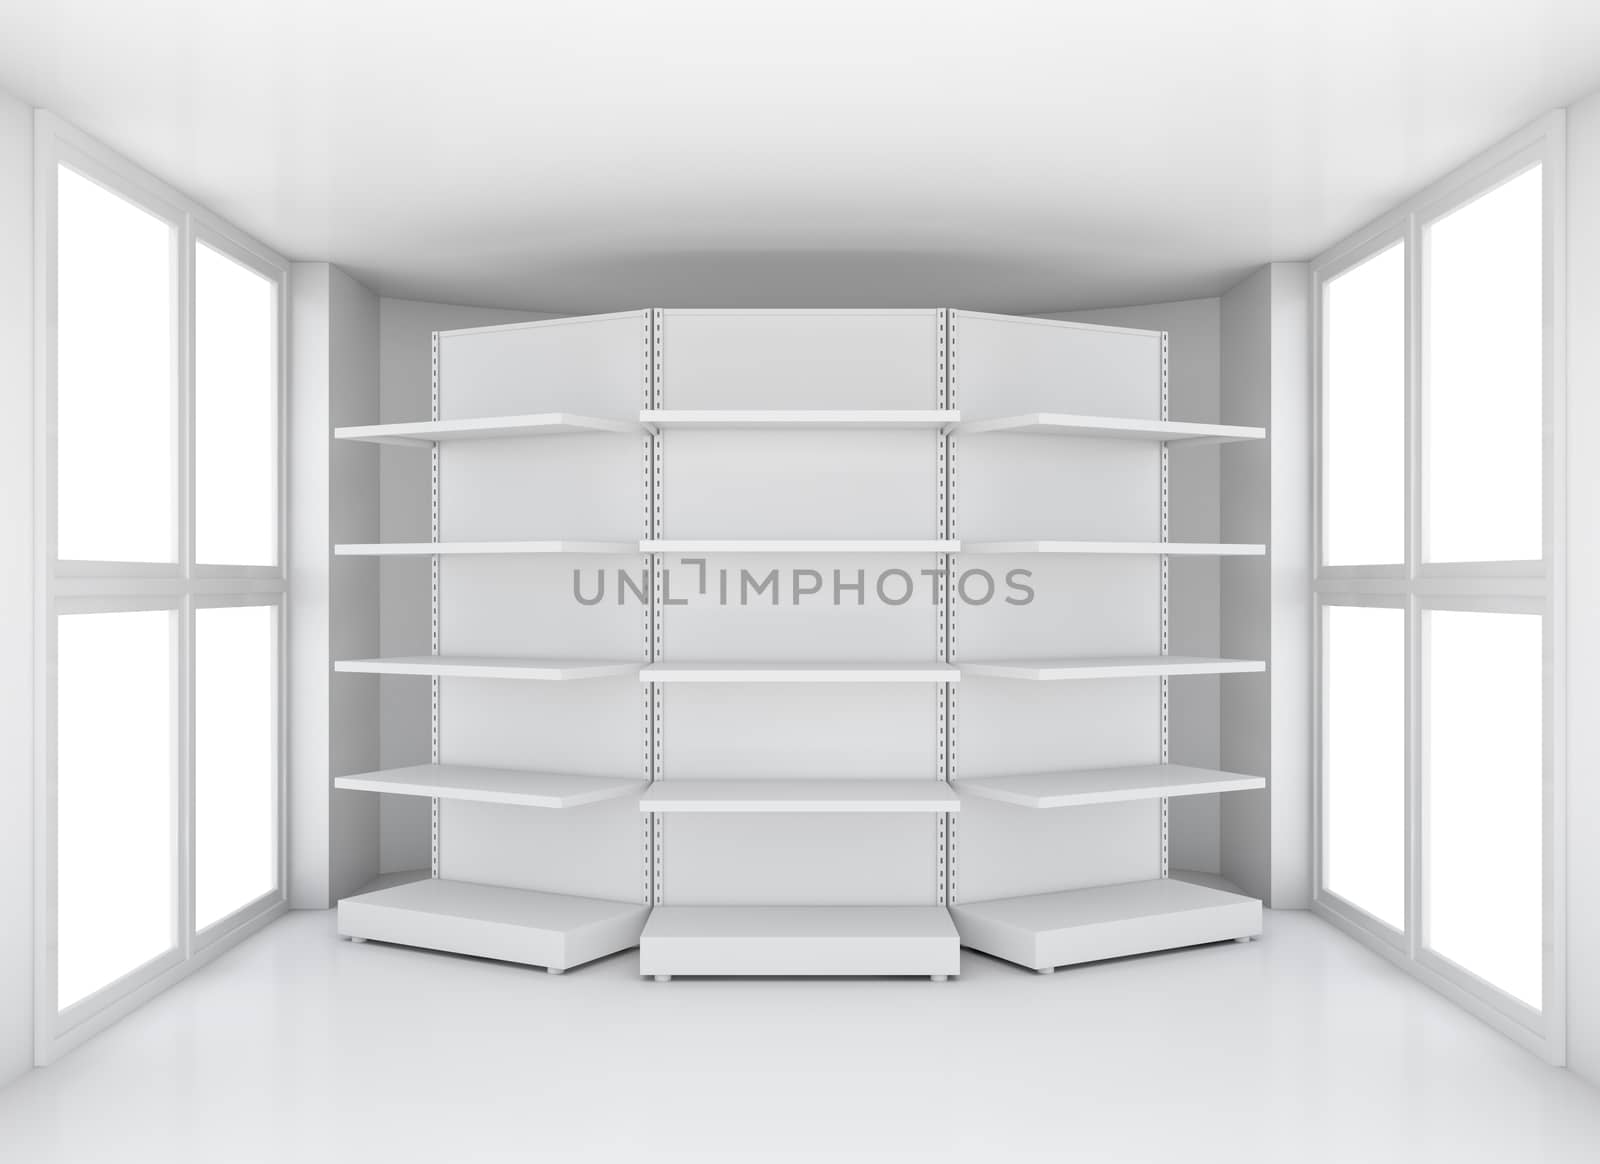 Realistic empty supermarket shelf in room with windows, 3D illustration